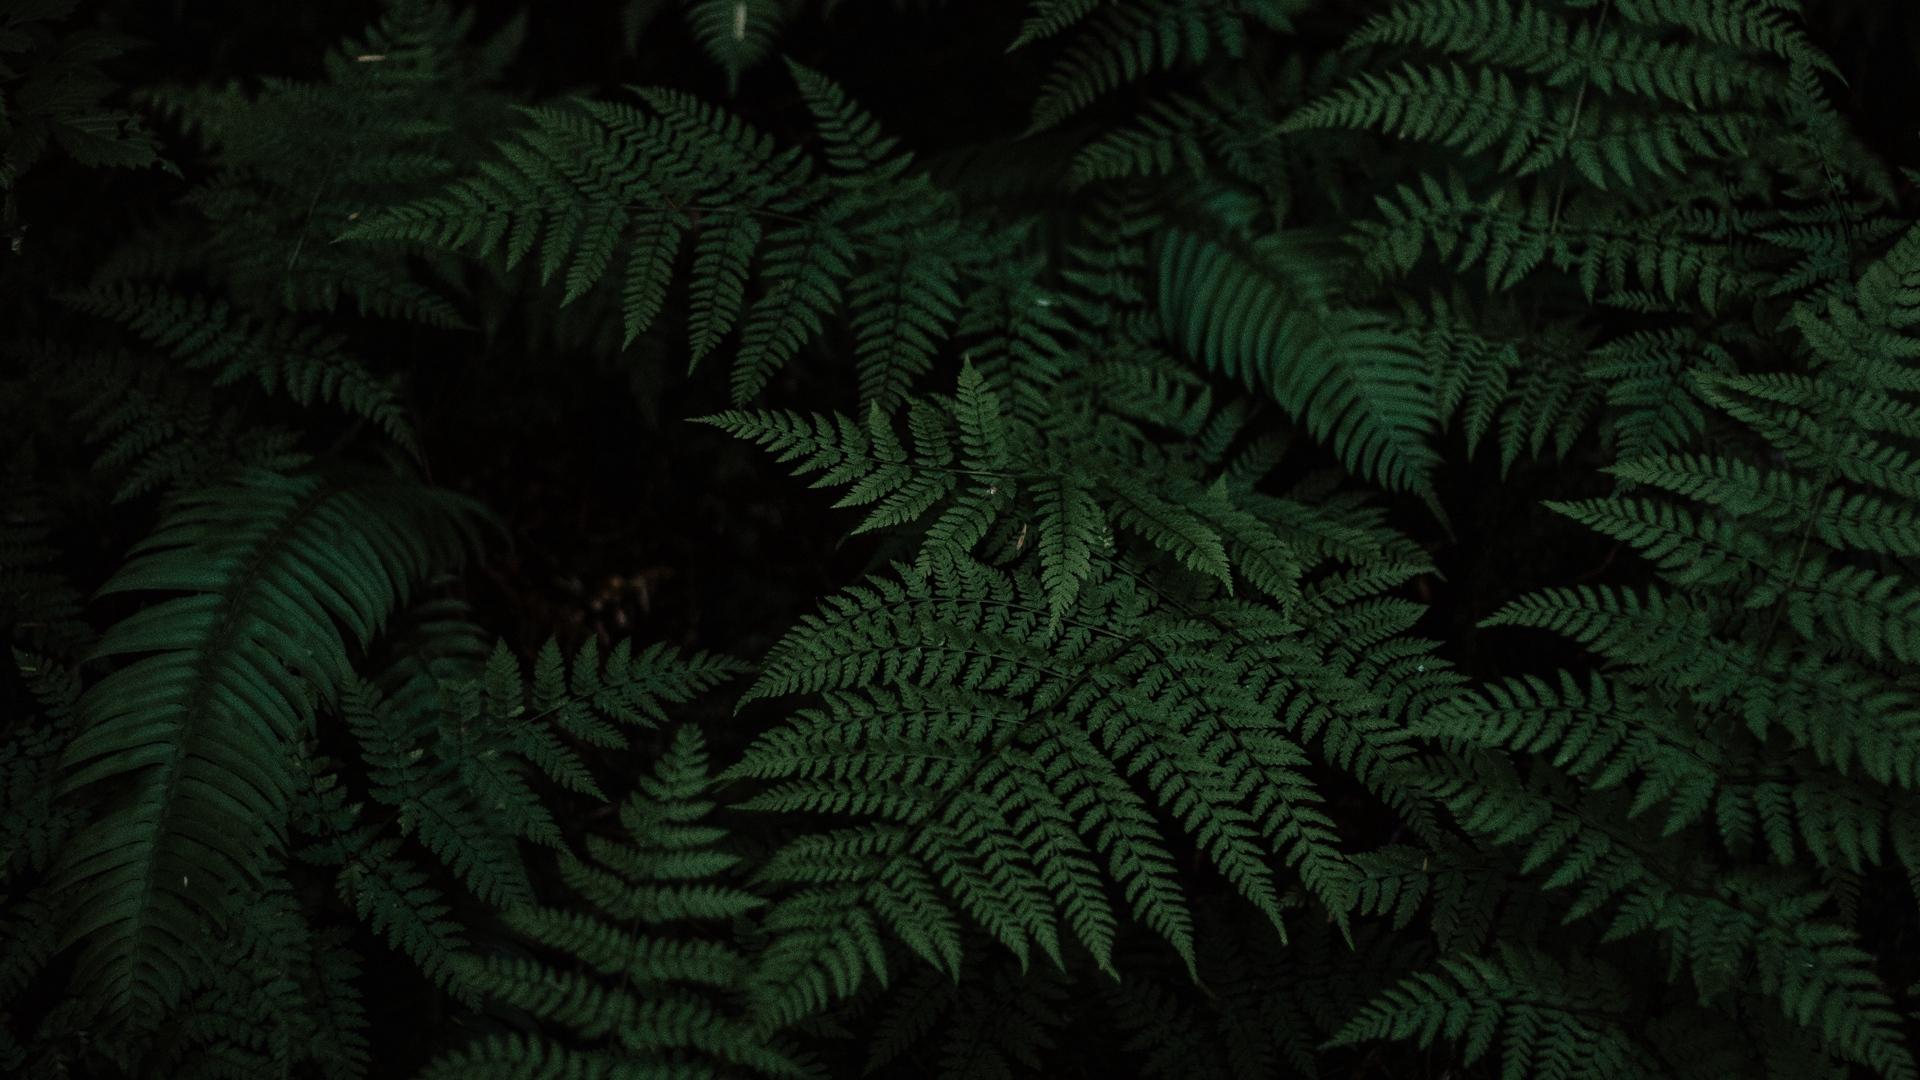 Download wallpaper 1920x1080 fern, leaves, carved, plant, green full